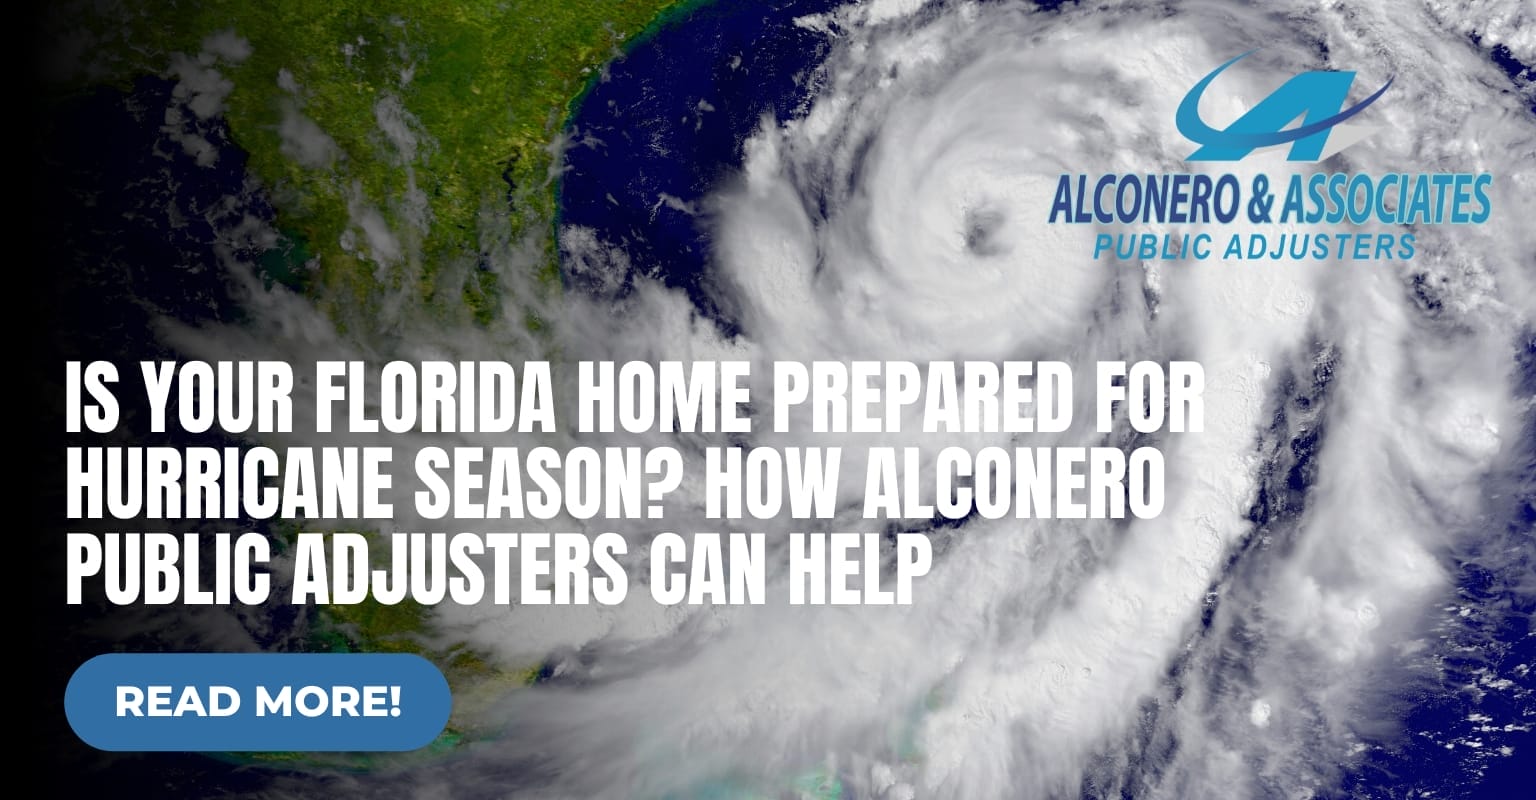 Is Your Florida Home Prepared for Hurricane Season? How Alconero Public Adjusters Can Help